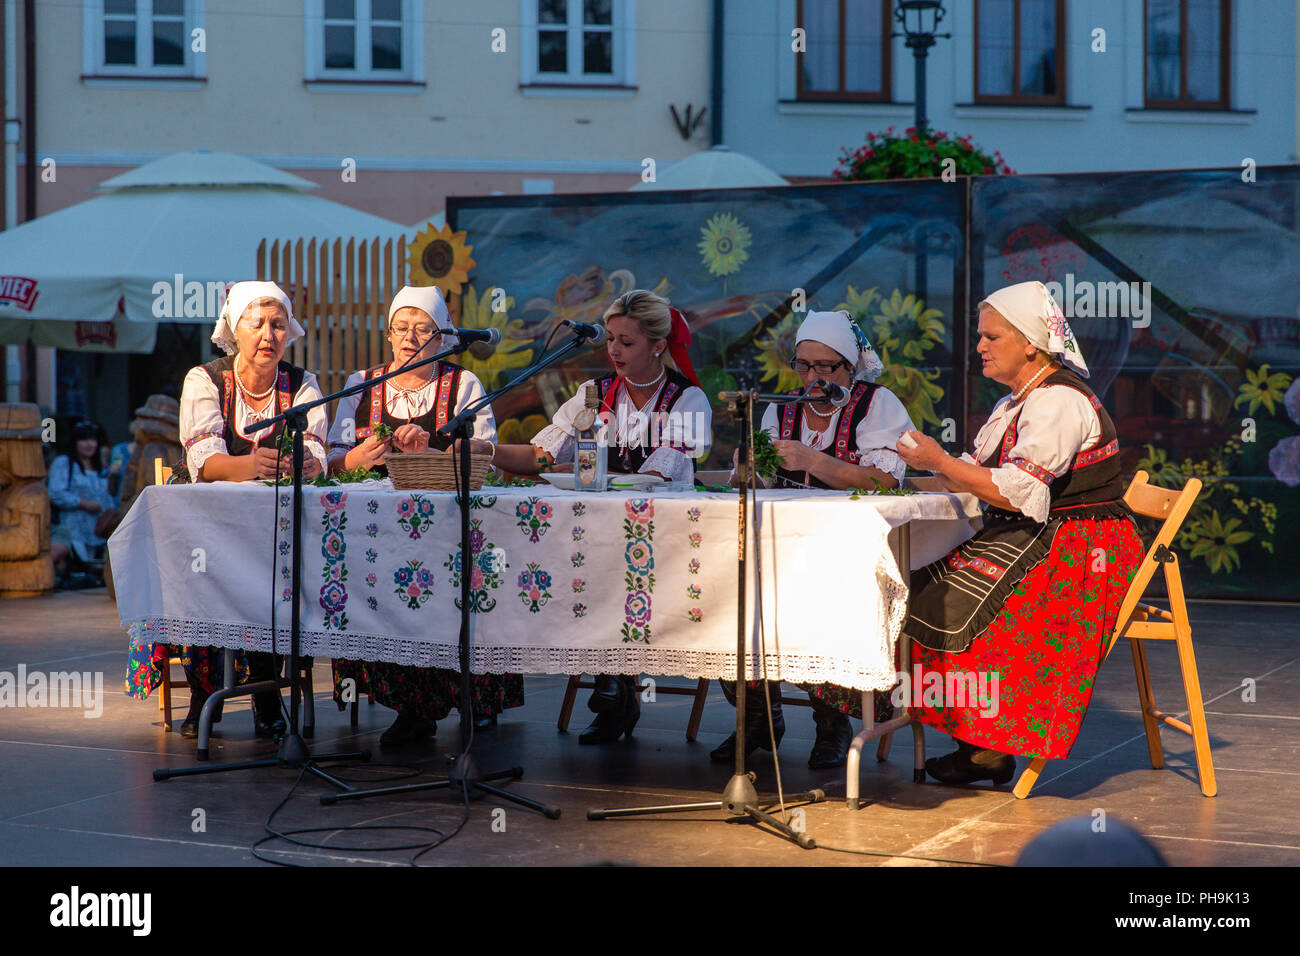 Hungarian Magyar Women dress in traditional Folk costumes singing on stage at the Carpathian Climates international cultural event in Krosno, Poland Stock Photo